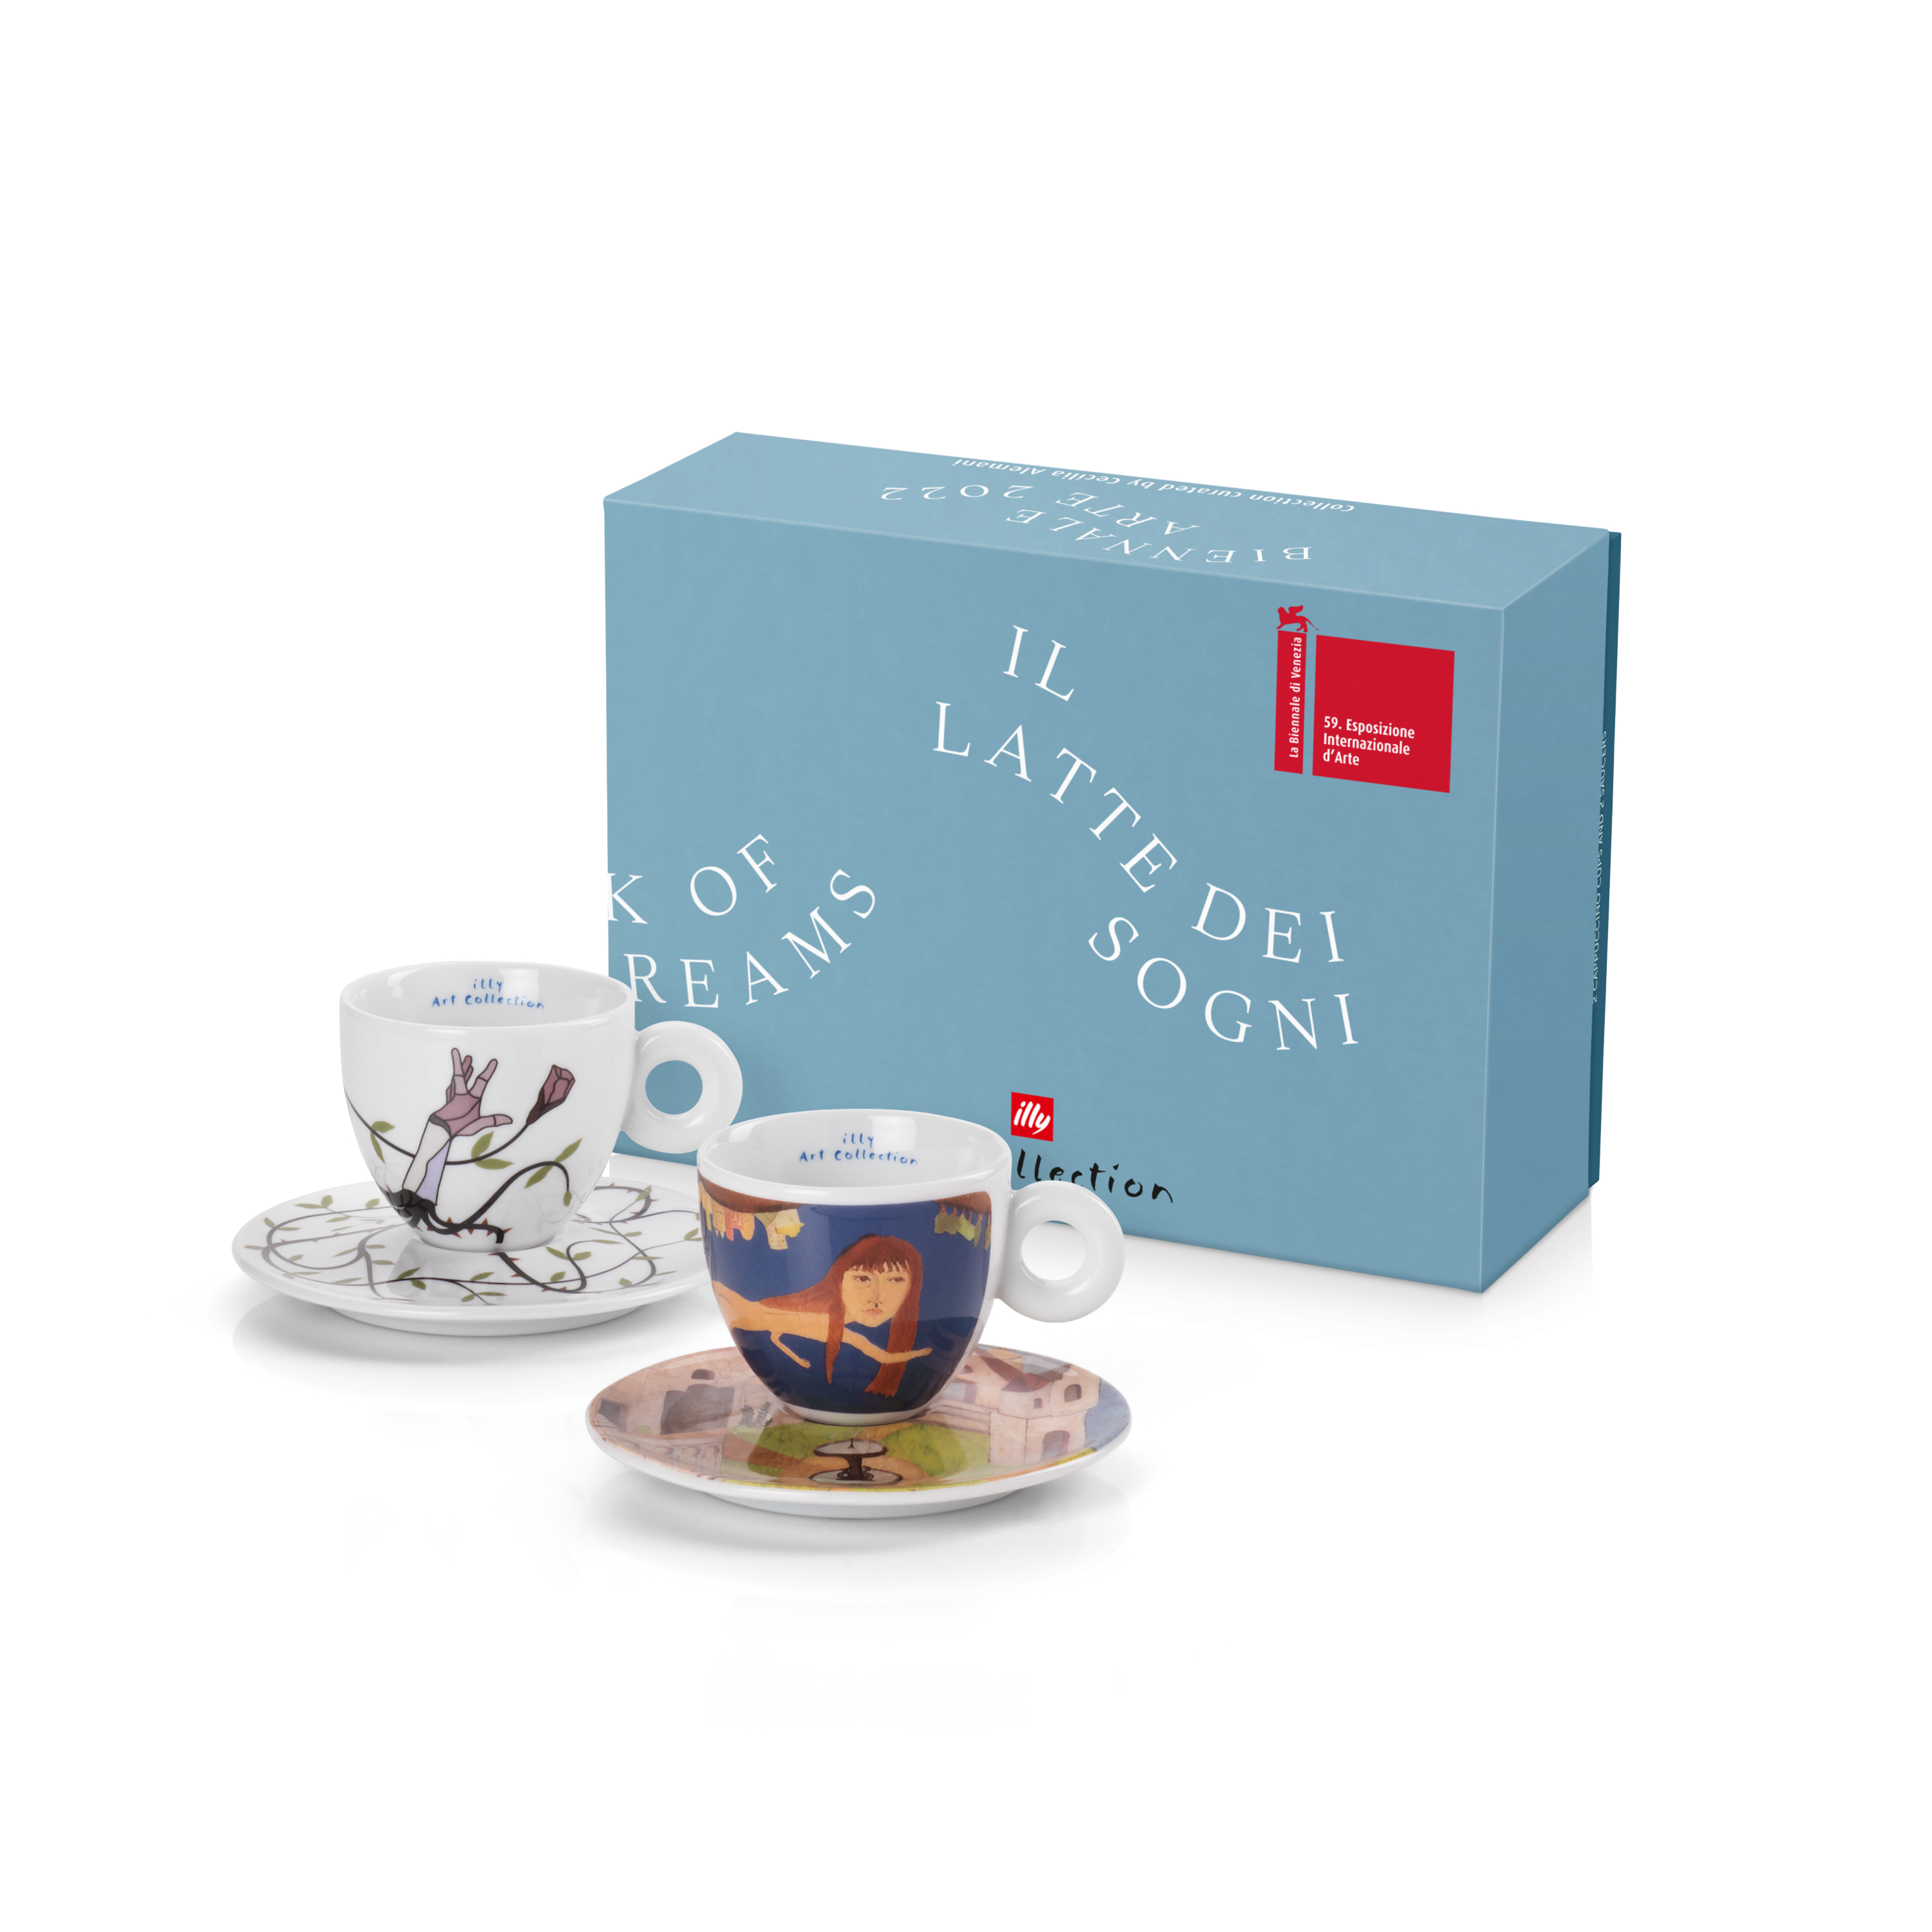 illy Art Collection ΒΙΕΝΝΑLE 2022 Σετ Δώρου 2 Cappuccino Cups | BAEZA & VICUNA, Φλιτζάνια , 02-02-6083